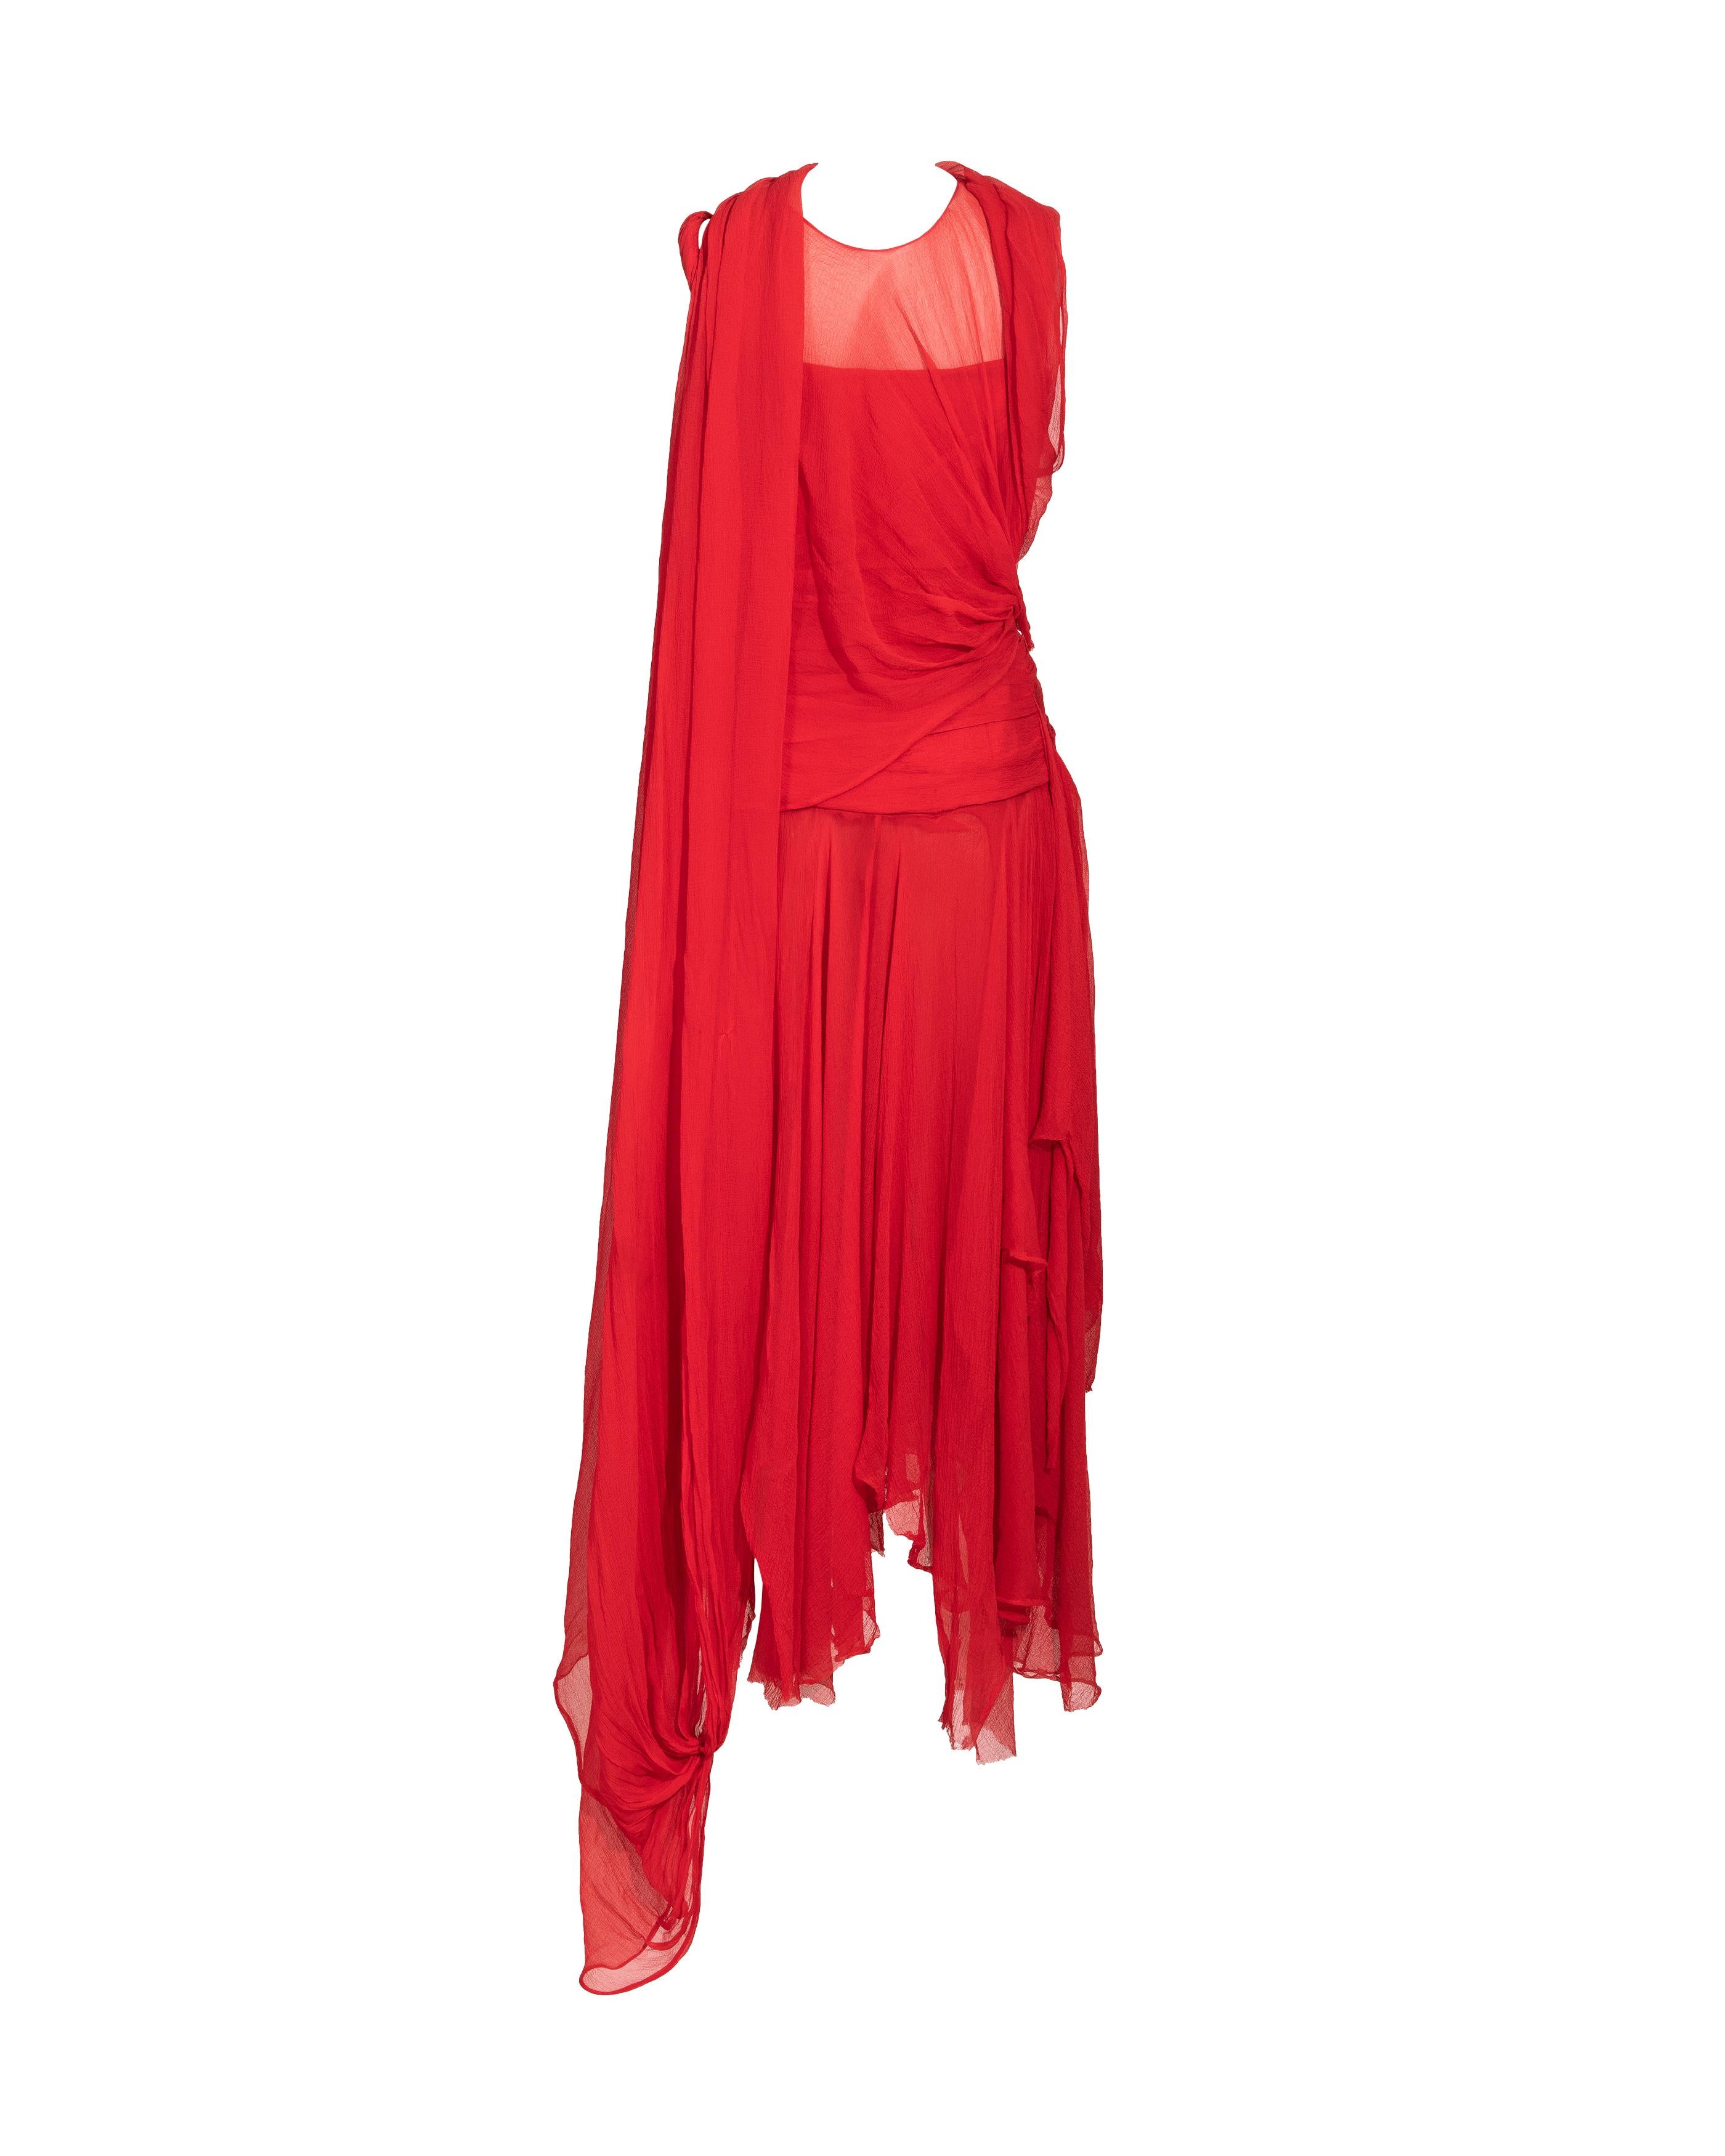 S/S 2003 Alexander McQueen  'Irere' Collection Red Silk Chiffon Gown with Sash For Sale 2